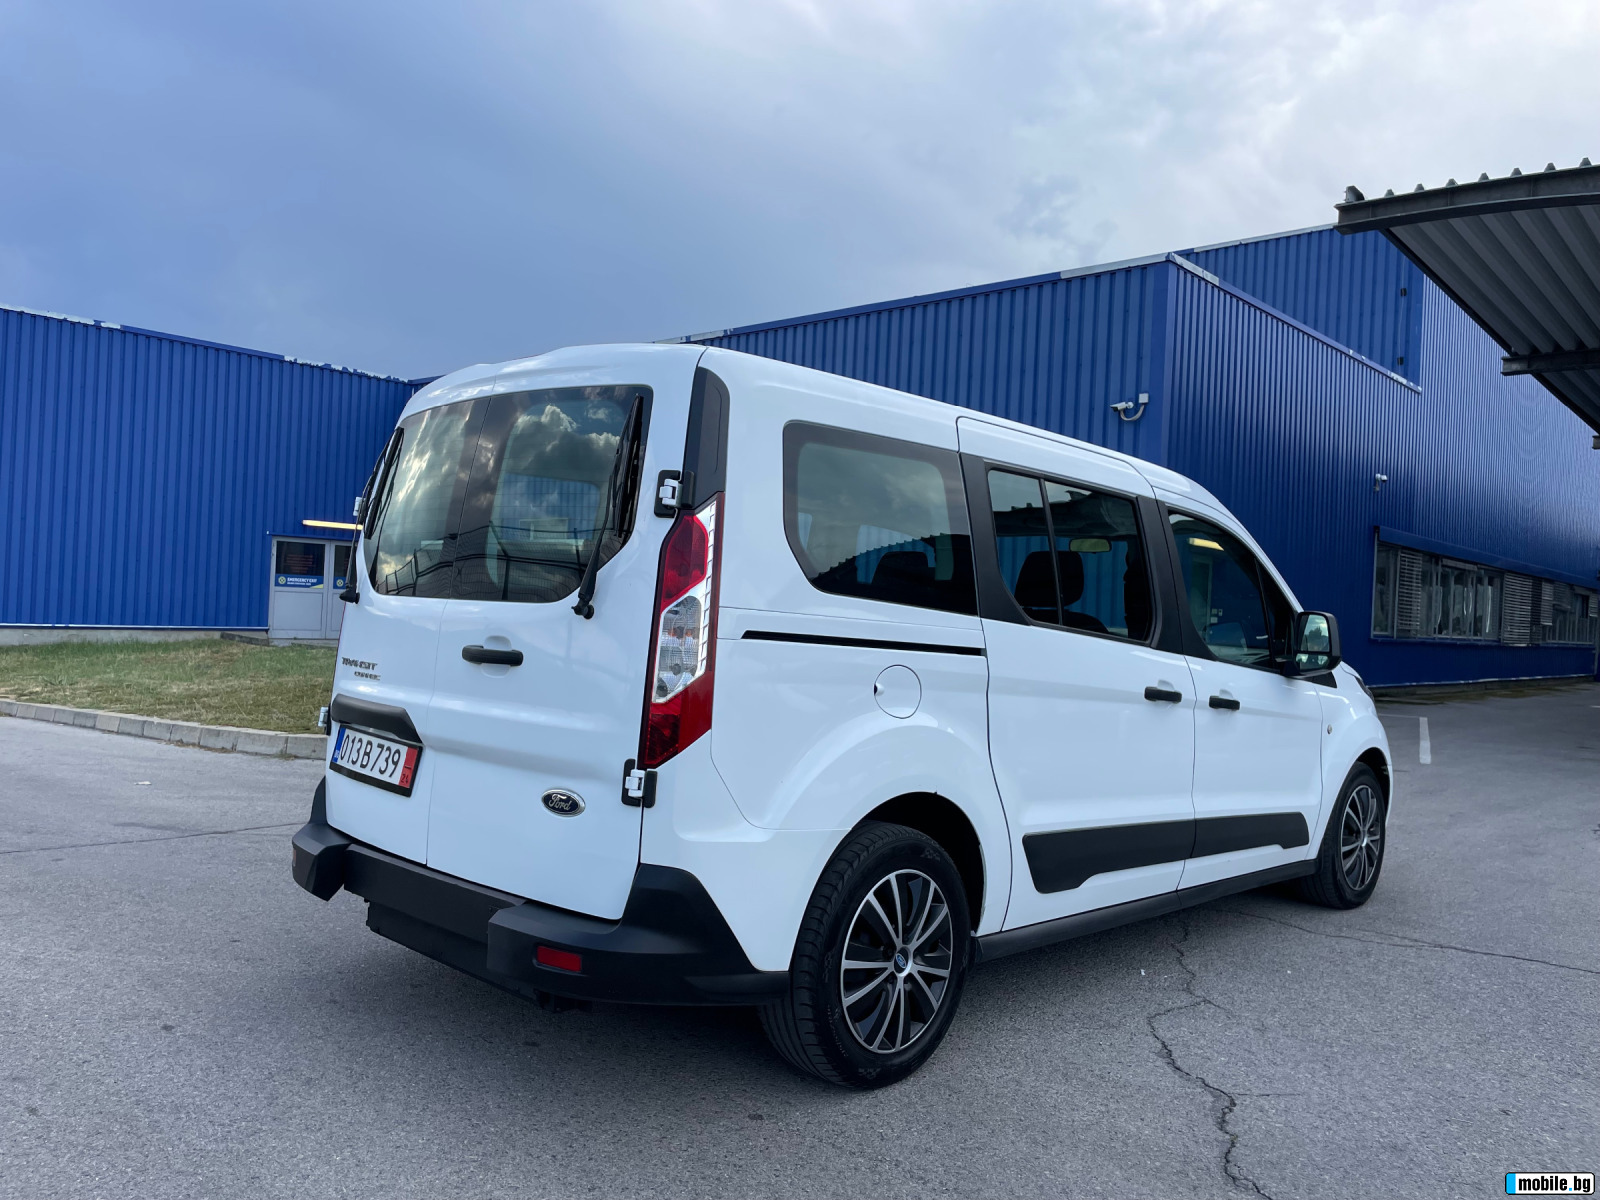 Ford Connect     EURO-6 | Mobile.bg   5